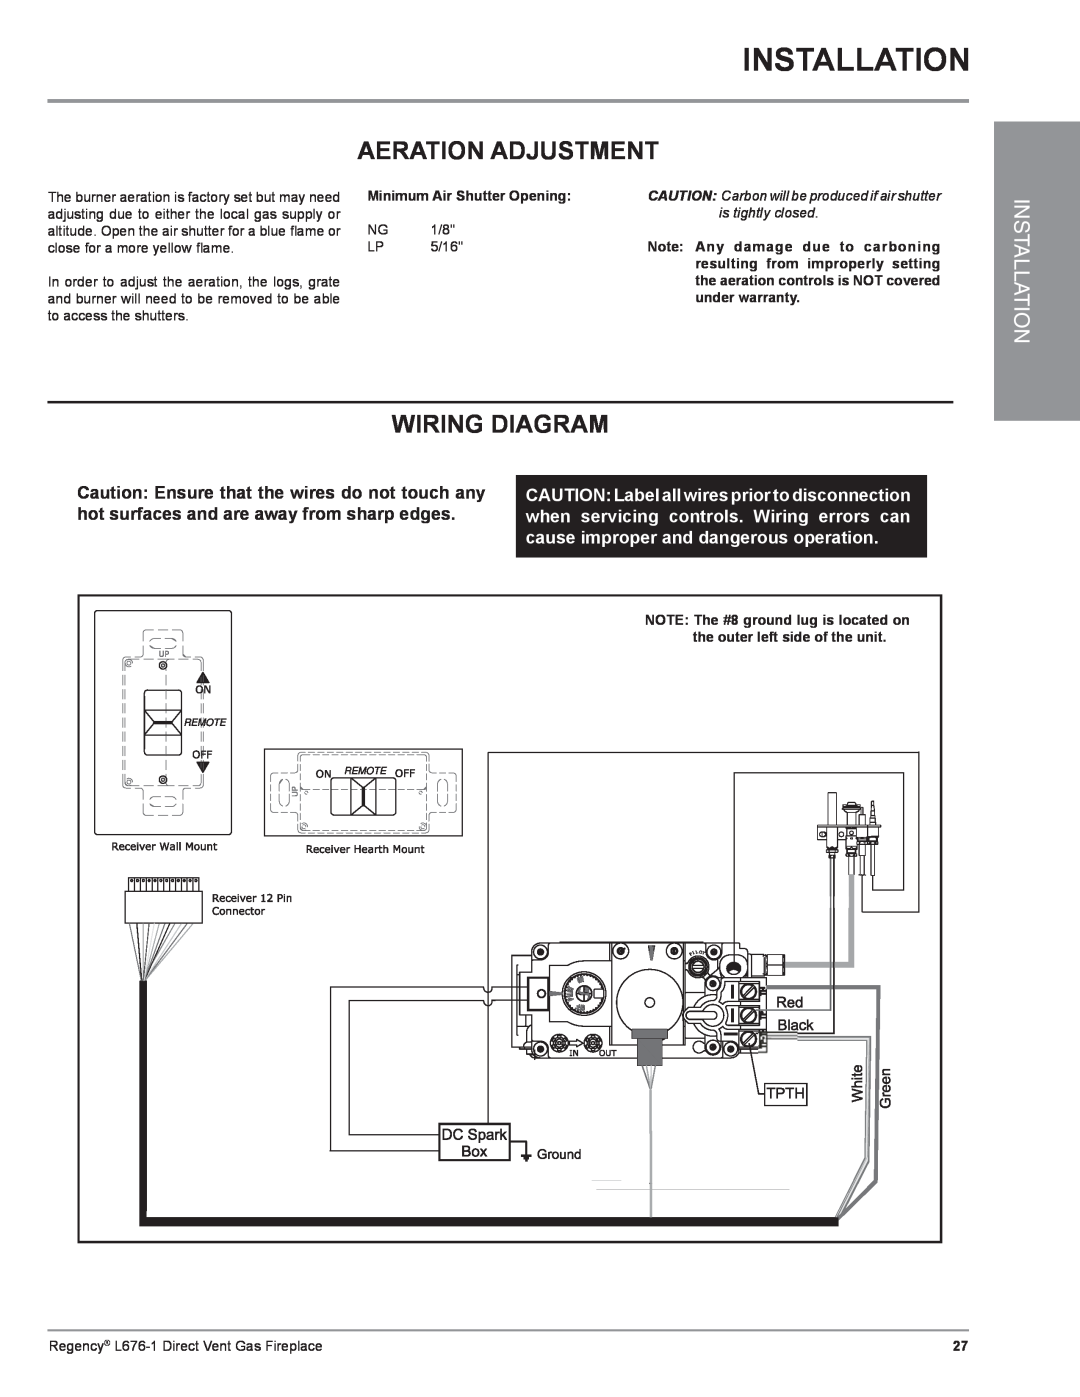 Regency L676-NG1 Installation, Aeration Adjustment, Wiring Diagram, CAUTION: Label all wires prior to disconnection, 5/16 